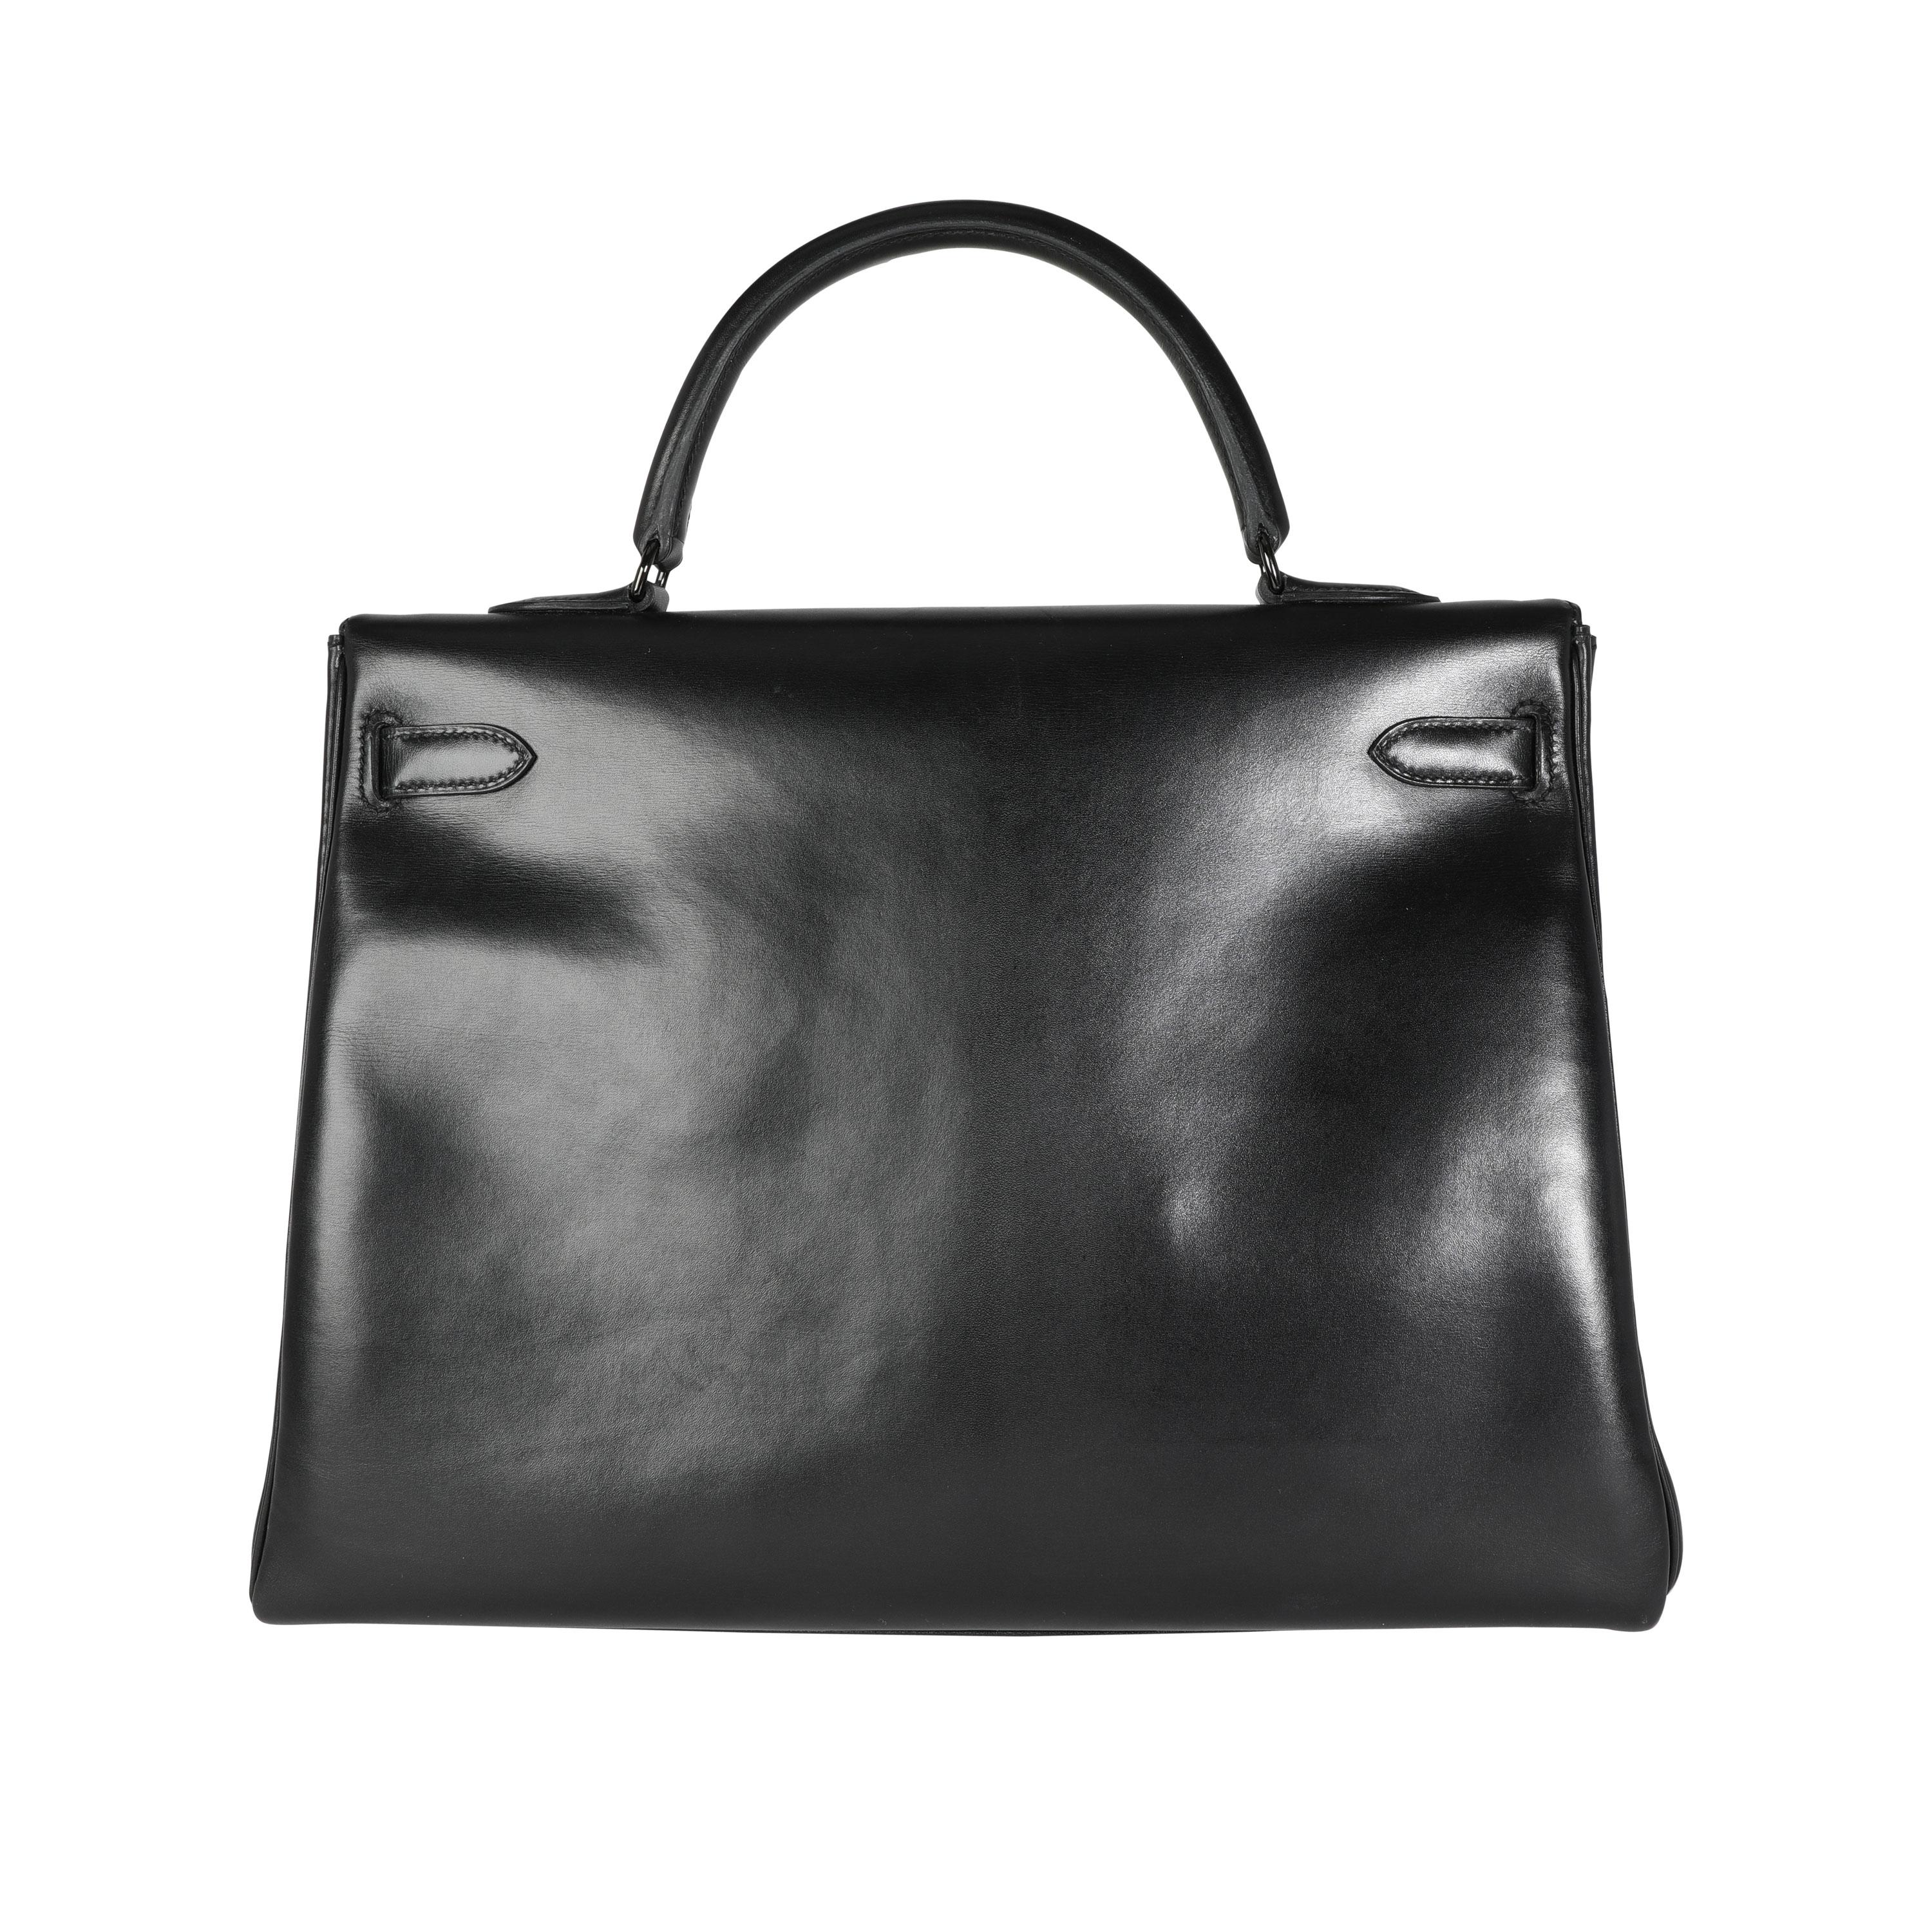 Listing Title: Hermès Rare Black Box Calf So Black Retourne Kelly 35 PVD
SKU: 115910
Condition: Pre-owned (3000)
Handbag Condition: Very Good
Condition Comments: Very Good Condition. Plastic on some hardware. Light scuffing to exterior due to nature